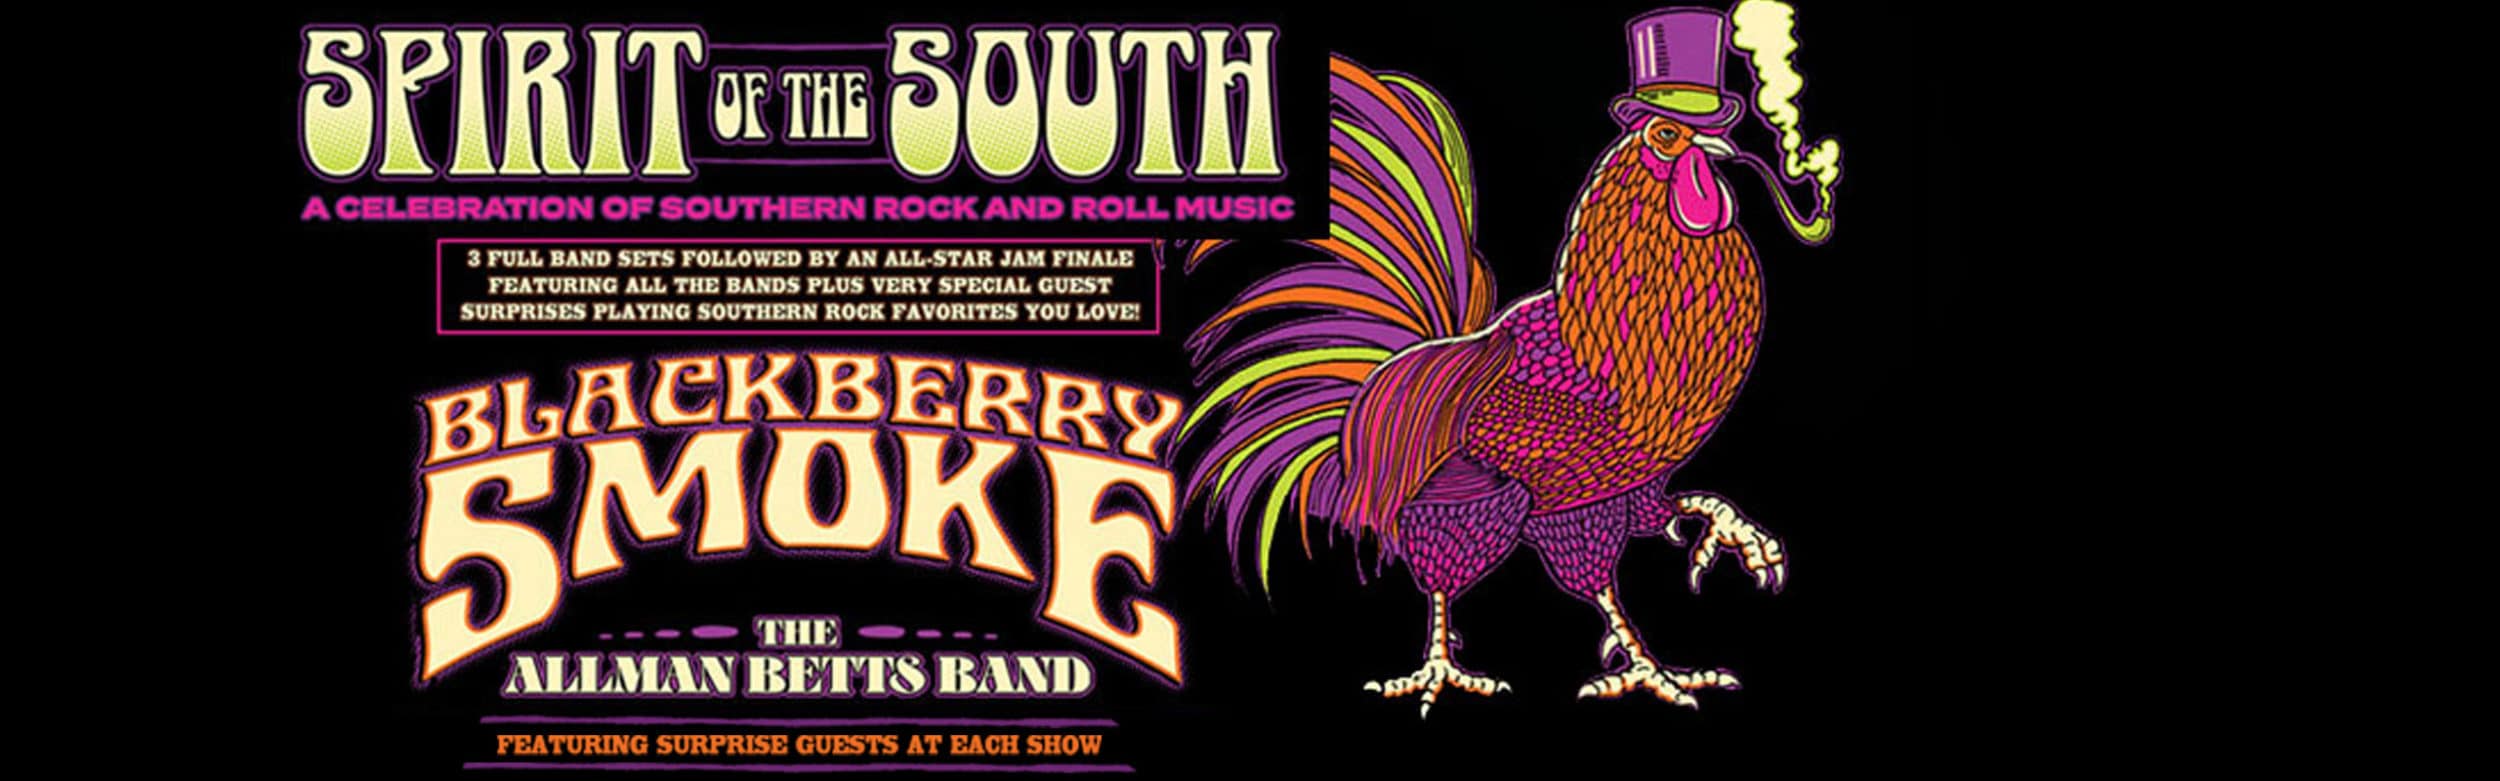 Blackberry Smoke with special guest The Allman Betts Band – Spirit of the South Tour